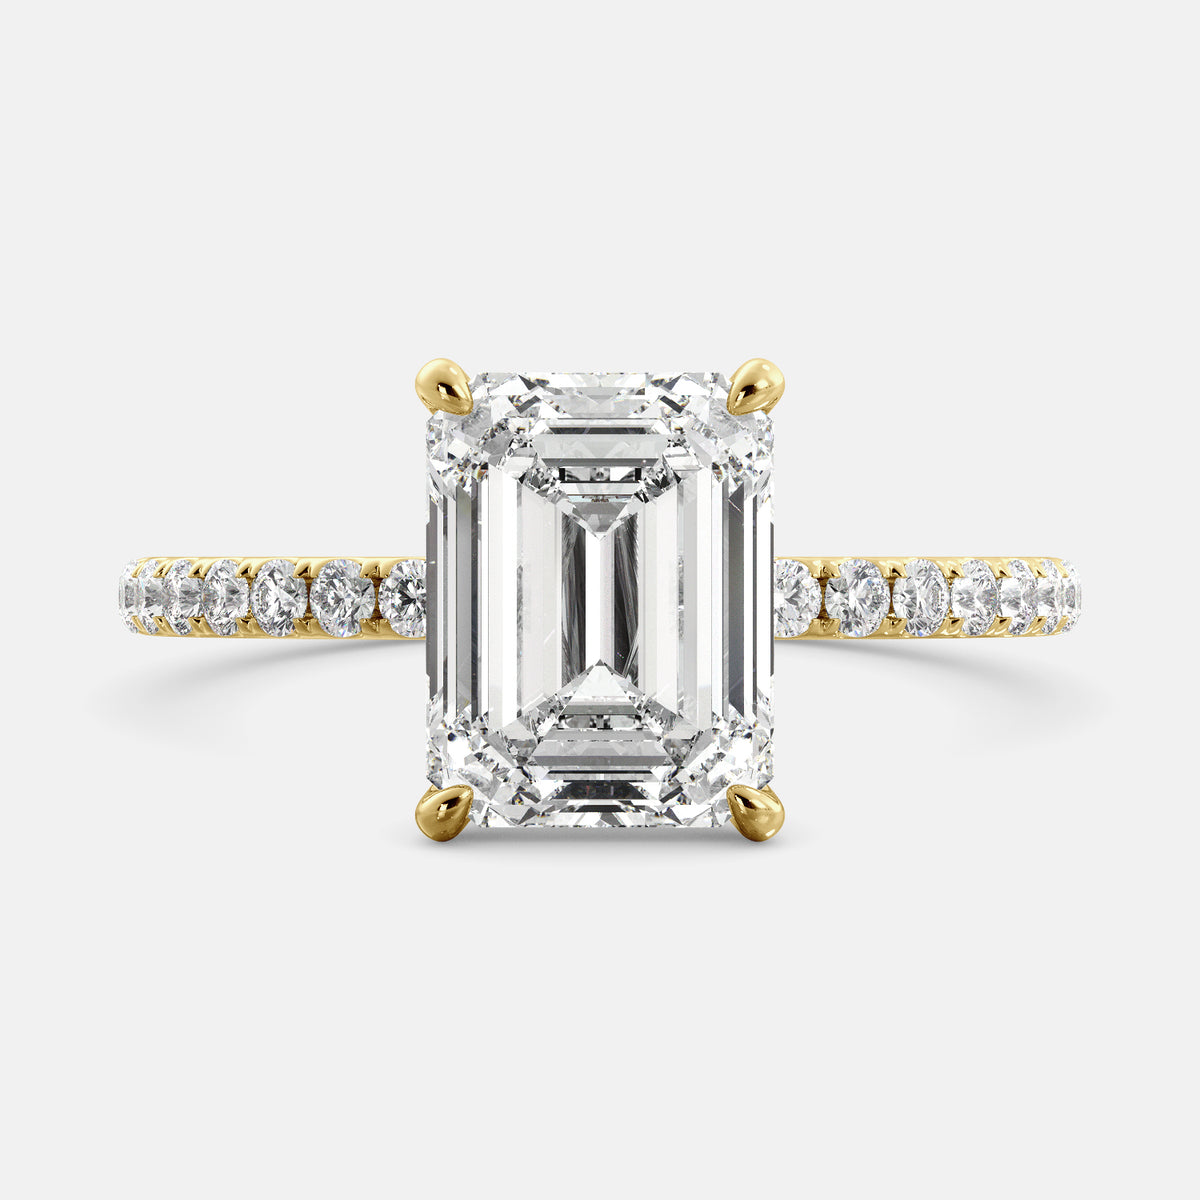 A close-up of an emerald solitaire lab-diamond ring with pave in yellow gold. The ring is set with an emerald-cut lab diamond in the center, surrounded by a row of smaller diamonds on the band. The diamond is climate-positive as it used carbon from the atmosphere to produce. The ring is available in a variety of sizes and starts at \\$6,350.00.